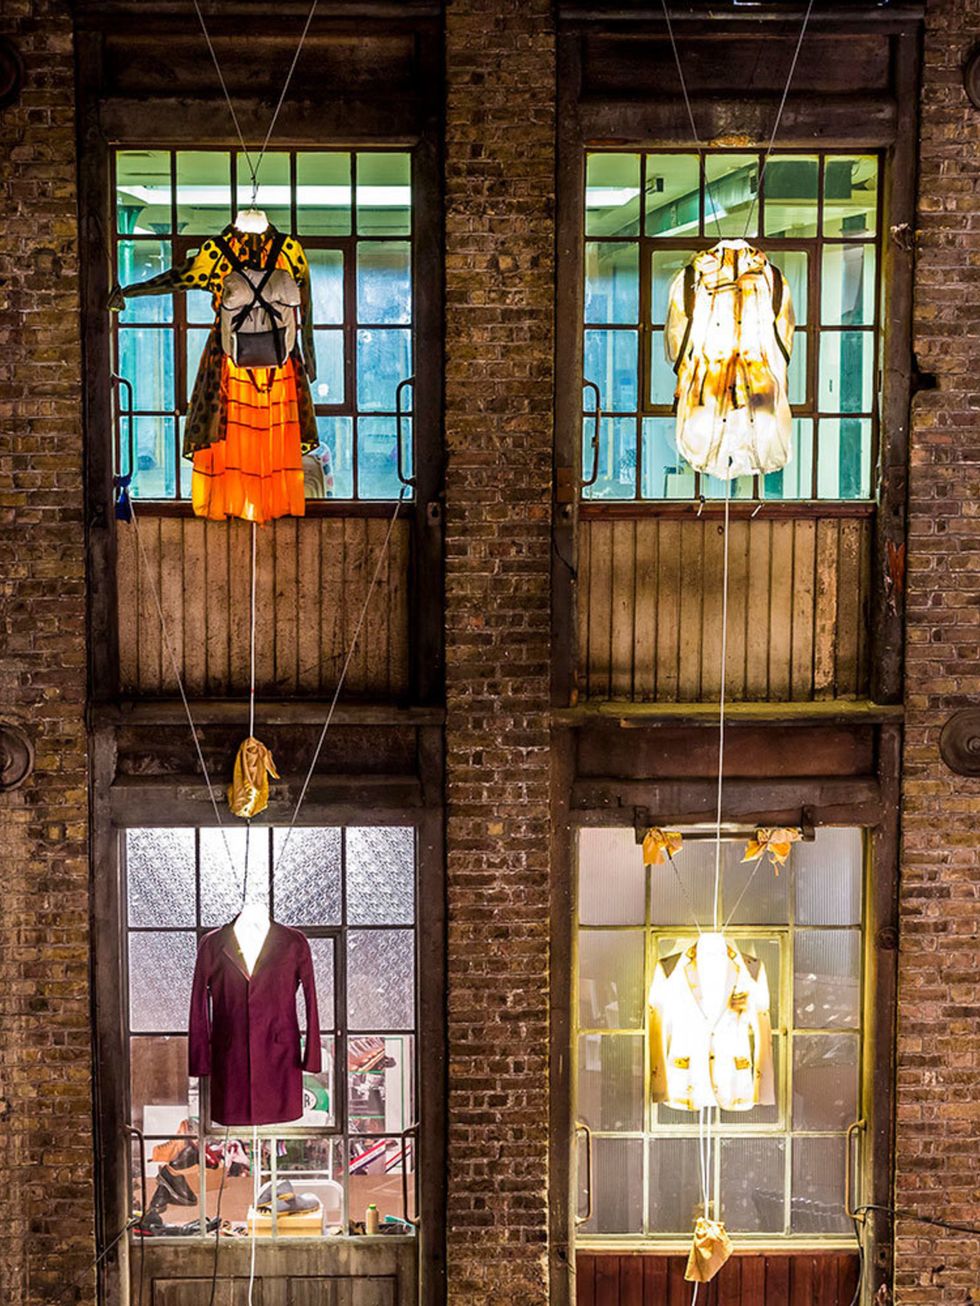 <p><strong>SHOPPING &ndash; Best of Britannia </strong></p>

<p>Forget having to endure the business of Oxford Street this weekend. Instead head to Best of Britannia, a pop-up department store with a difference.</p>

<p>Every item on offer - from midi ski